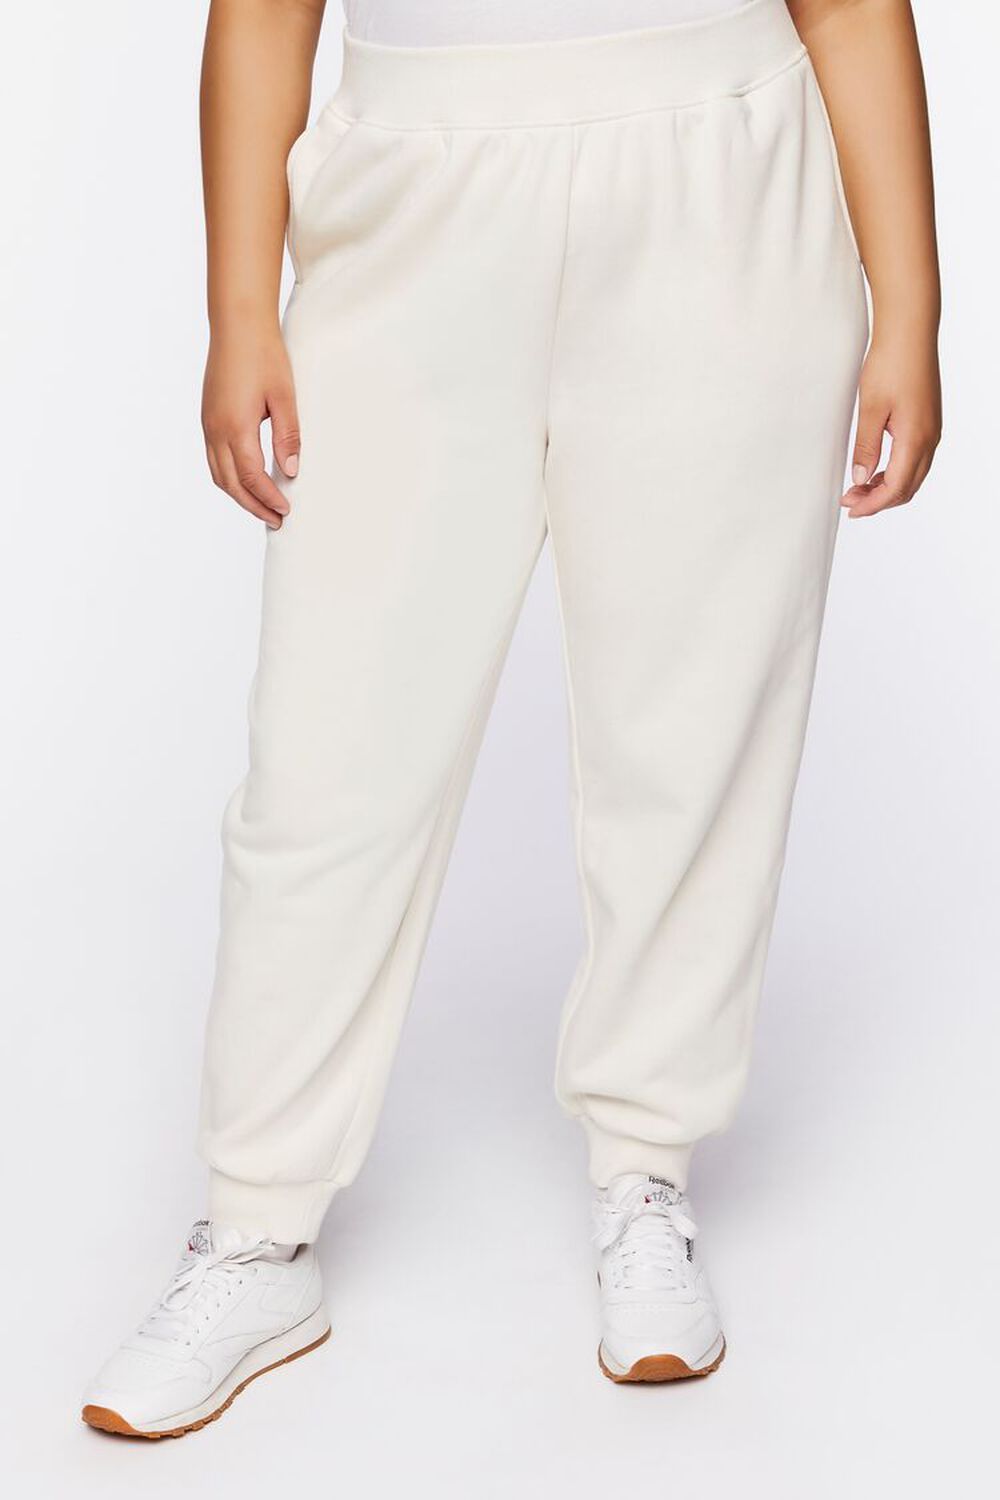 Plus Size Organically Grown Cotton Joggers